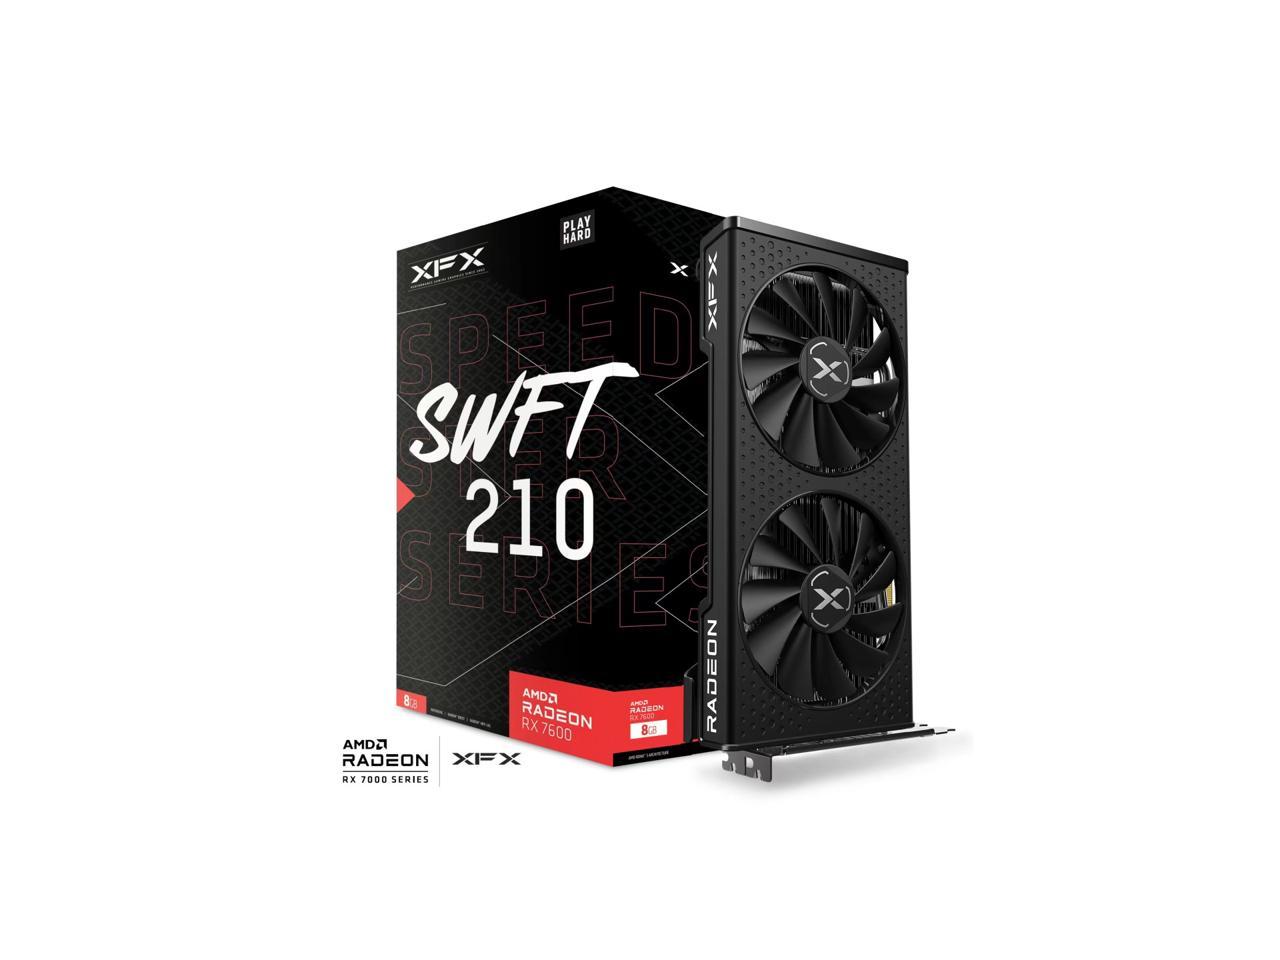 XFX Speedster SWFT210 Radeon RX 7600 Core Gaming Graphics Card $230 + Free Shipping